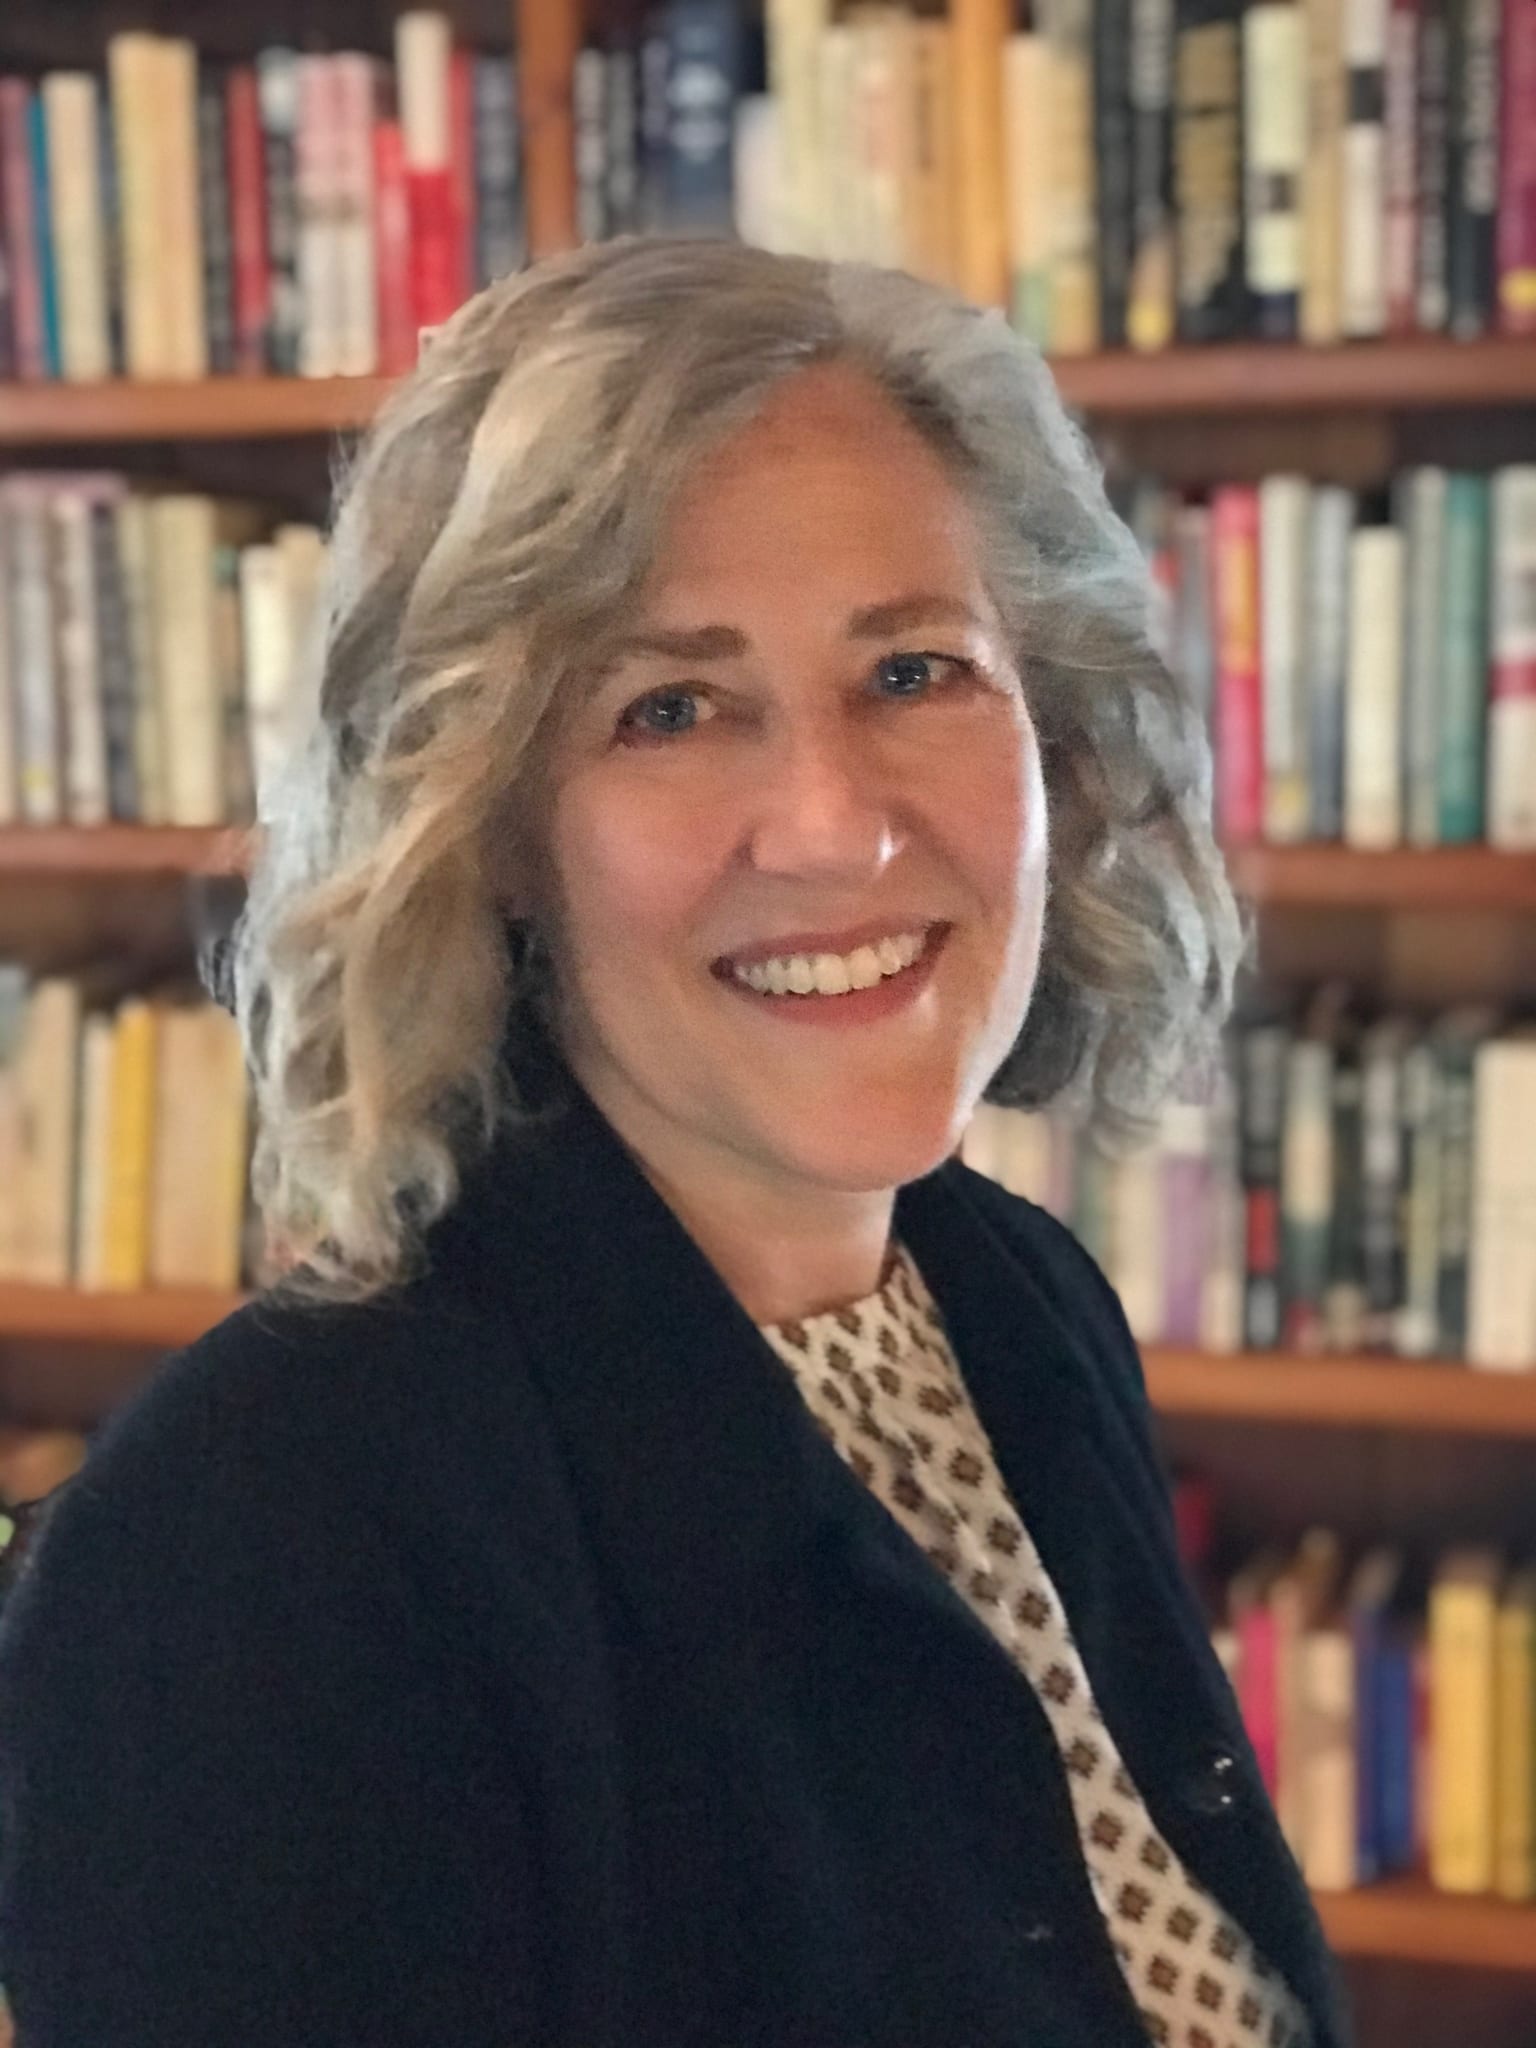 Portrait of Elissa, a middle-aged whit woman with shoulder-length, wavy, gray hair wearing a black jacket over a white print shirt, in front of blurred bookcase.